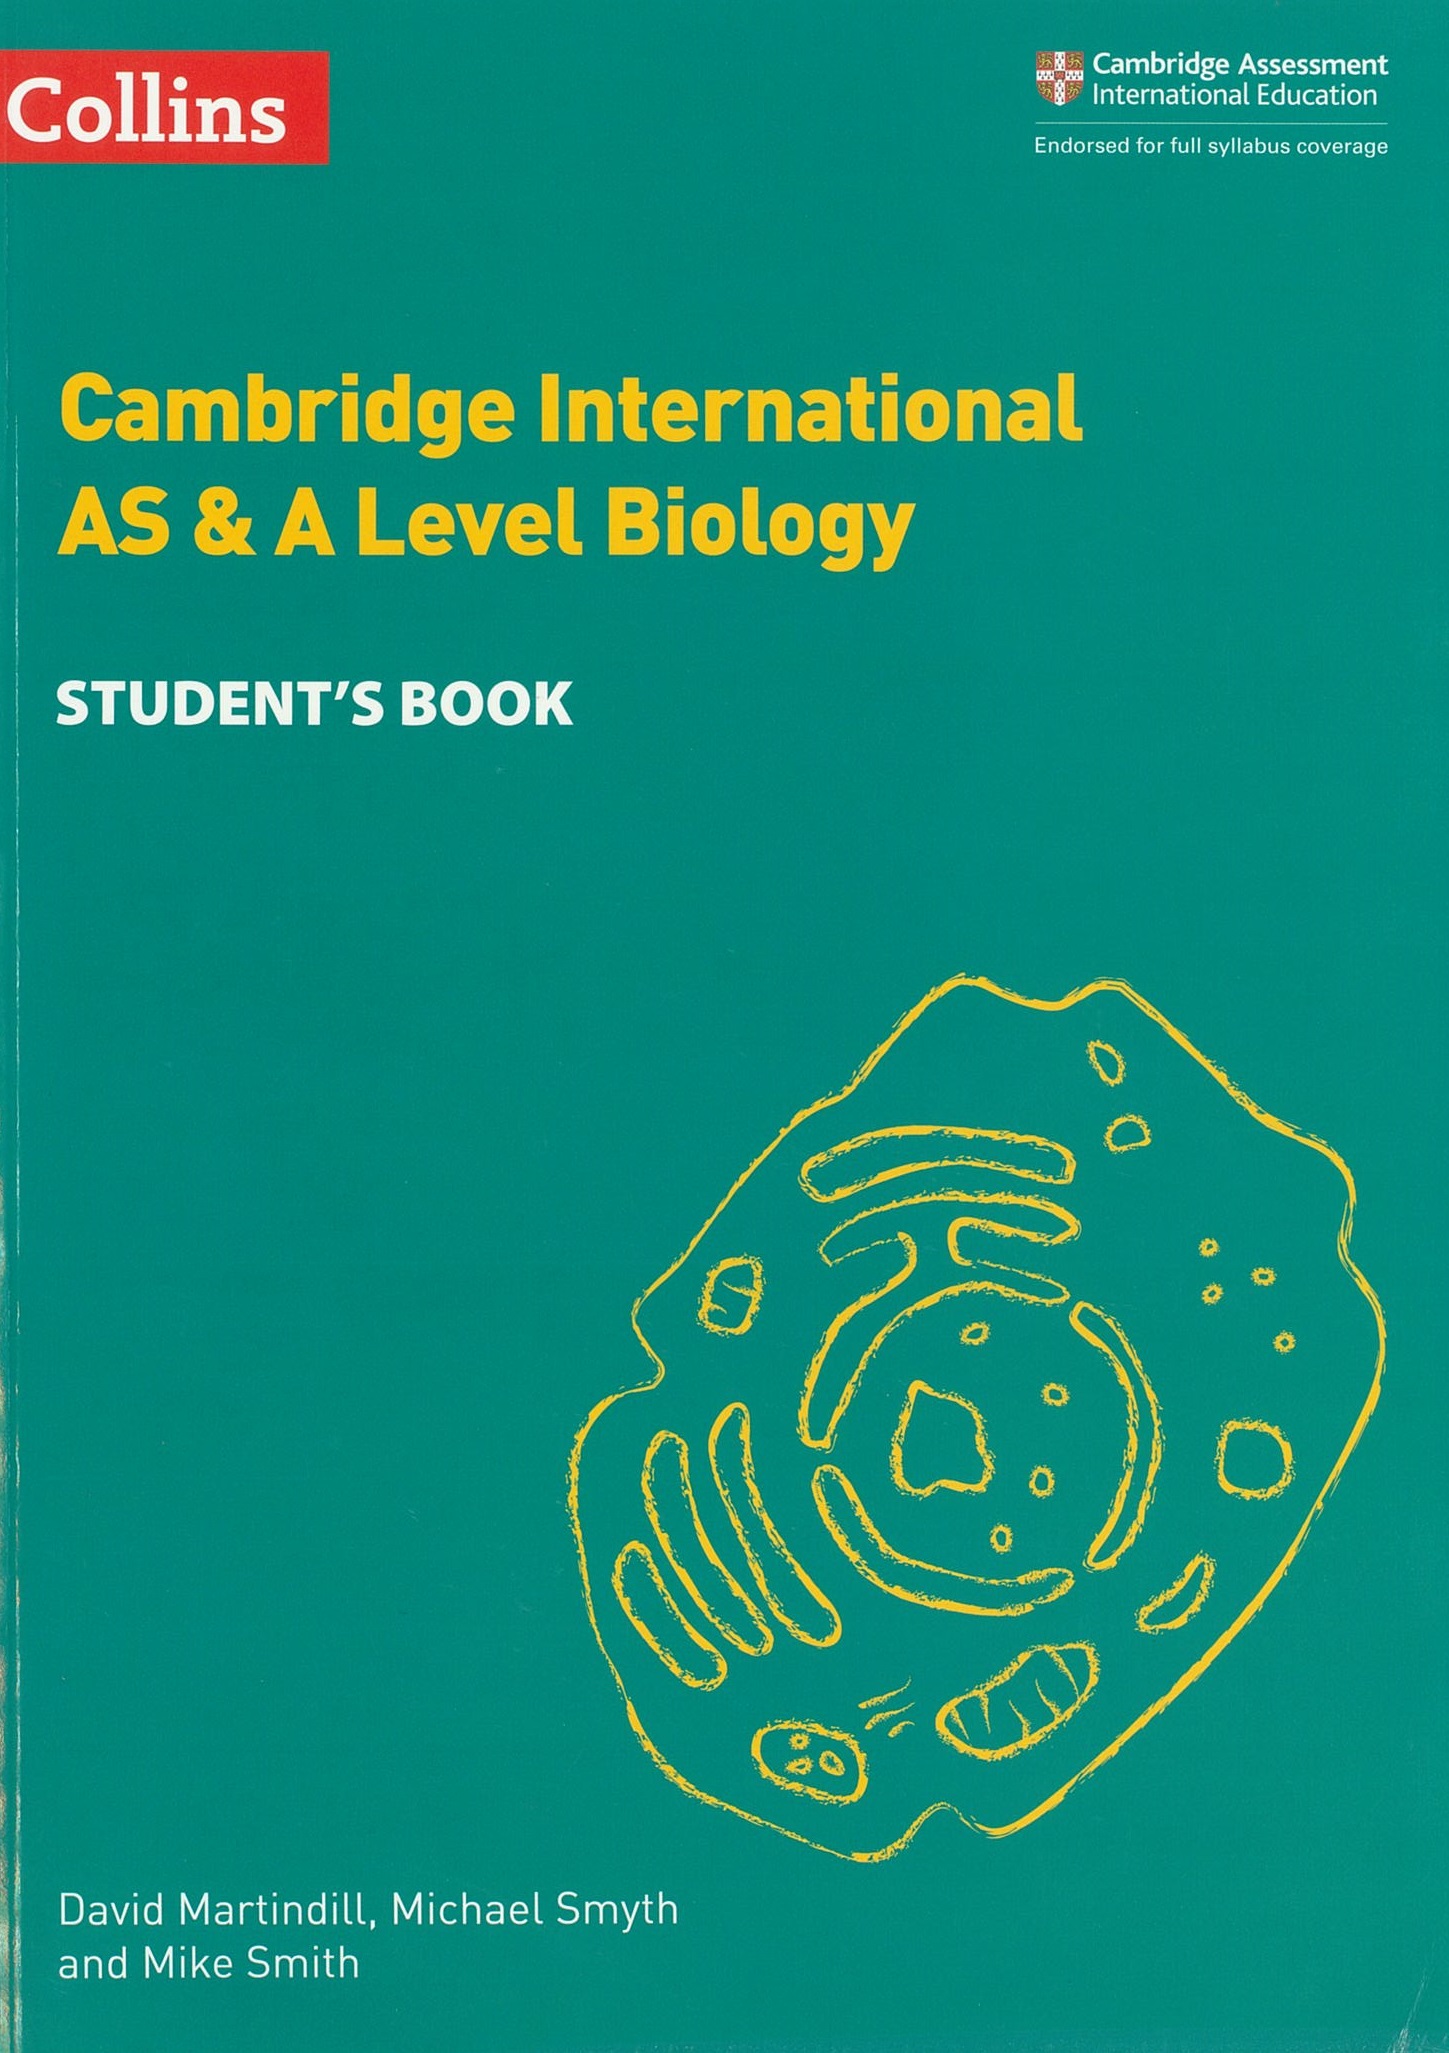 COLLINS - AS & A LEVEL BIOLOGY STUDENT BOOK - MARTINDHILL